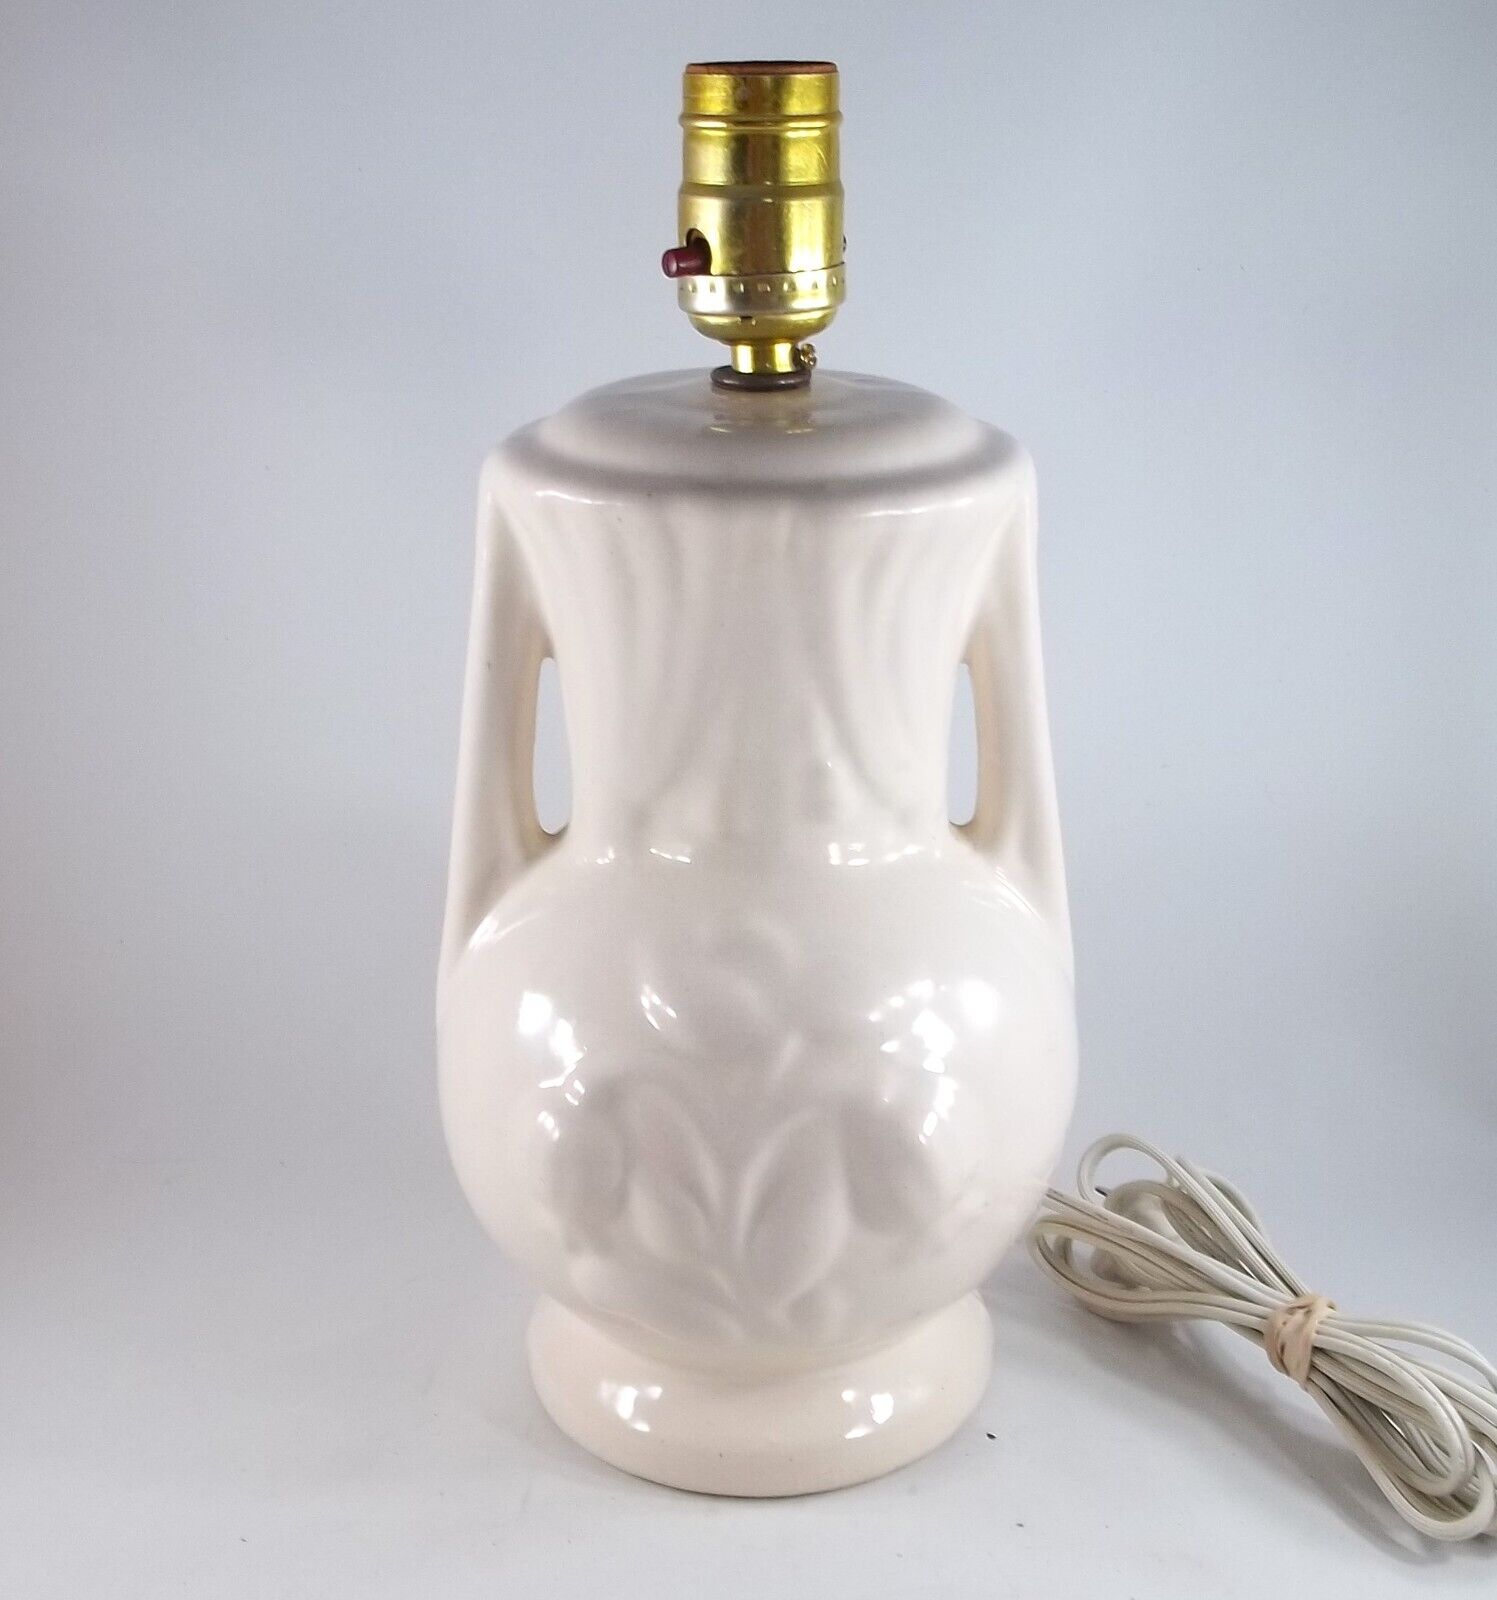 Vintage 1940's White Ceramic Table Lamp With Embossed Tulips Decoration